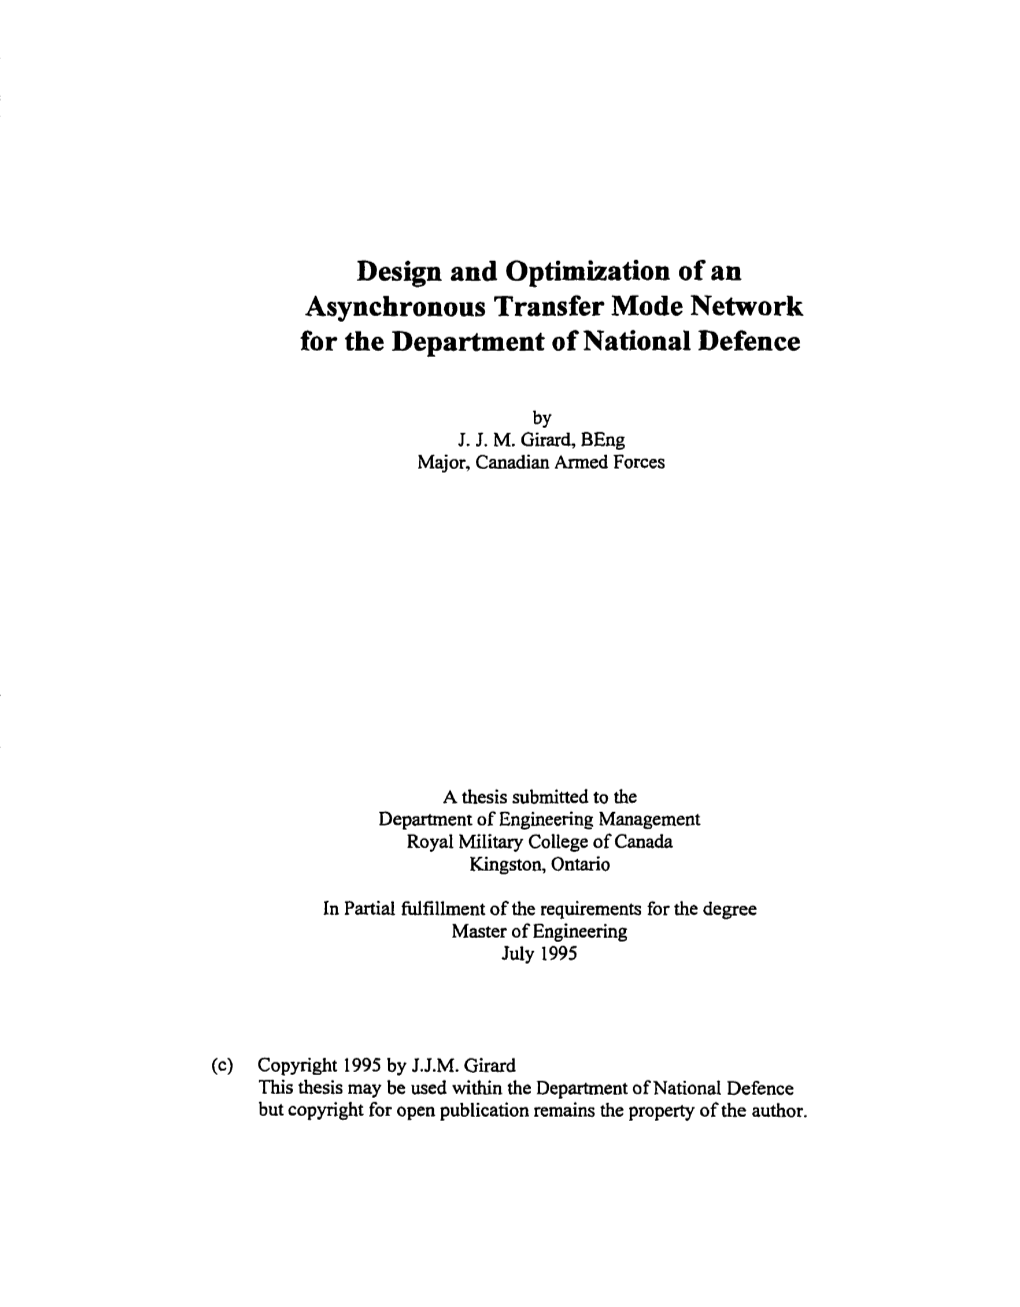 Asynchronous Transfer Mode Network for the Department of National Defence